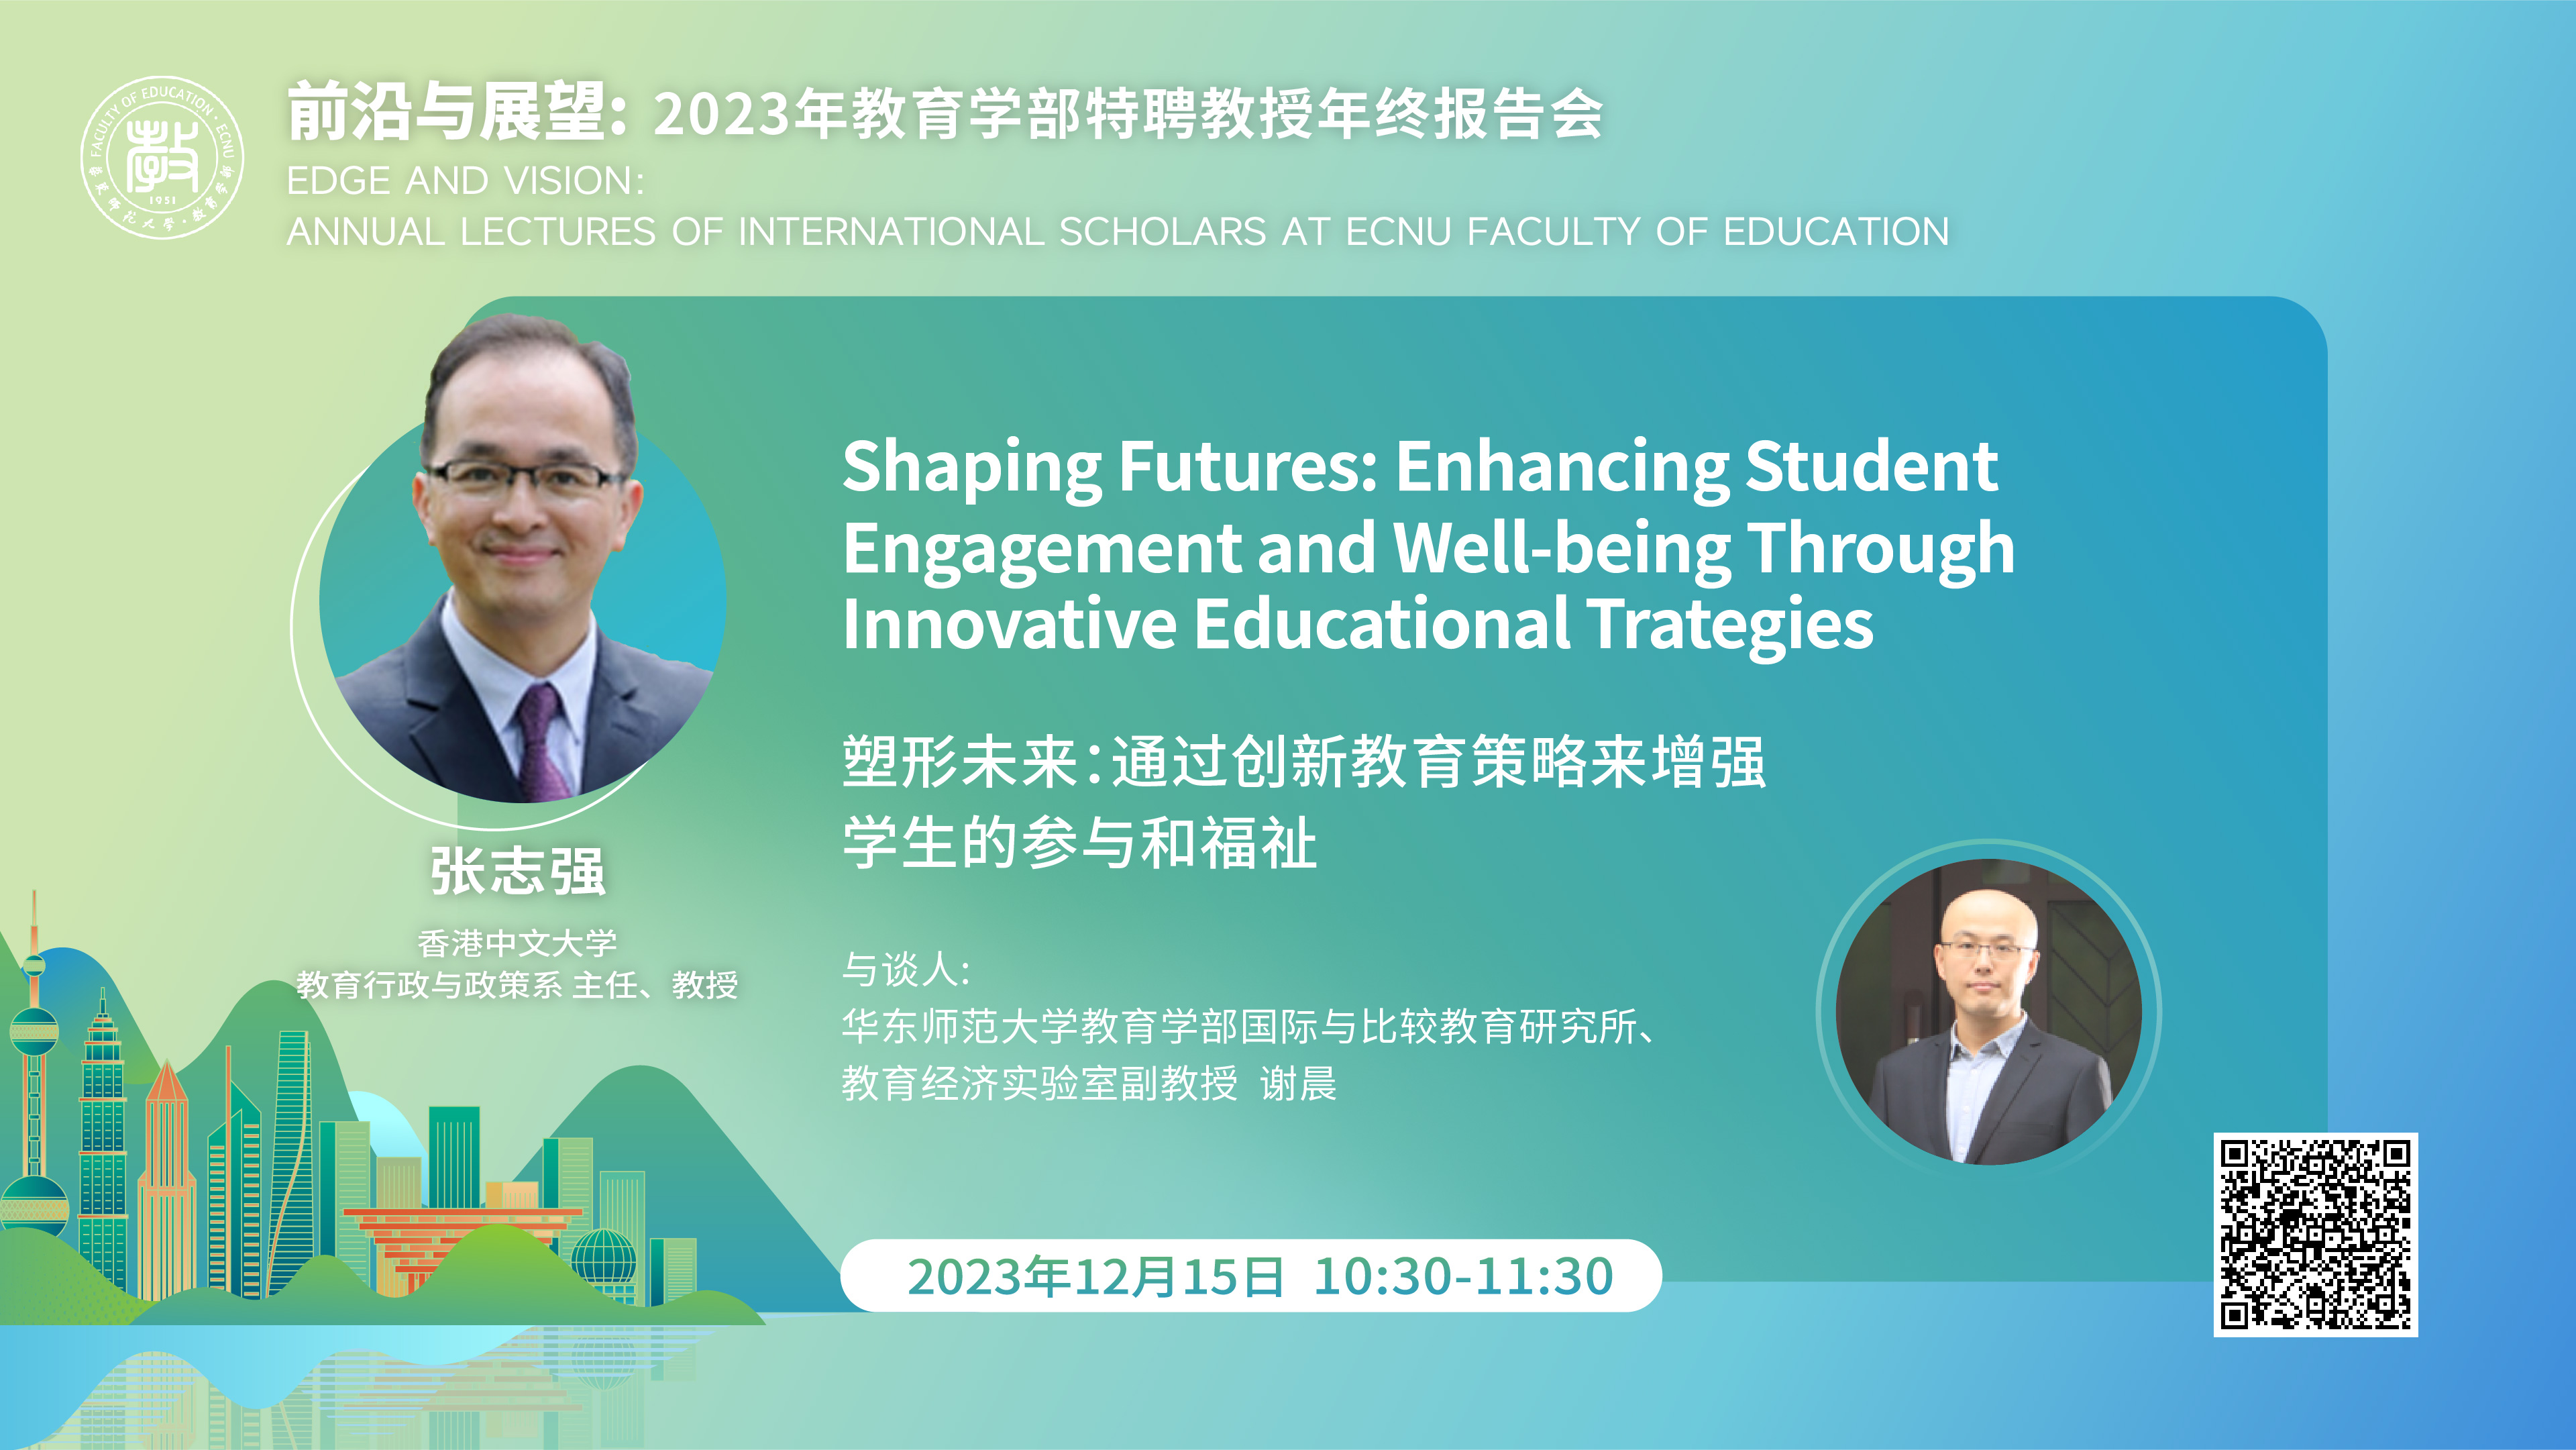 Series III: 2023 Annual Lectures of International Scholars–Prof. Alan C.K. Cheung